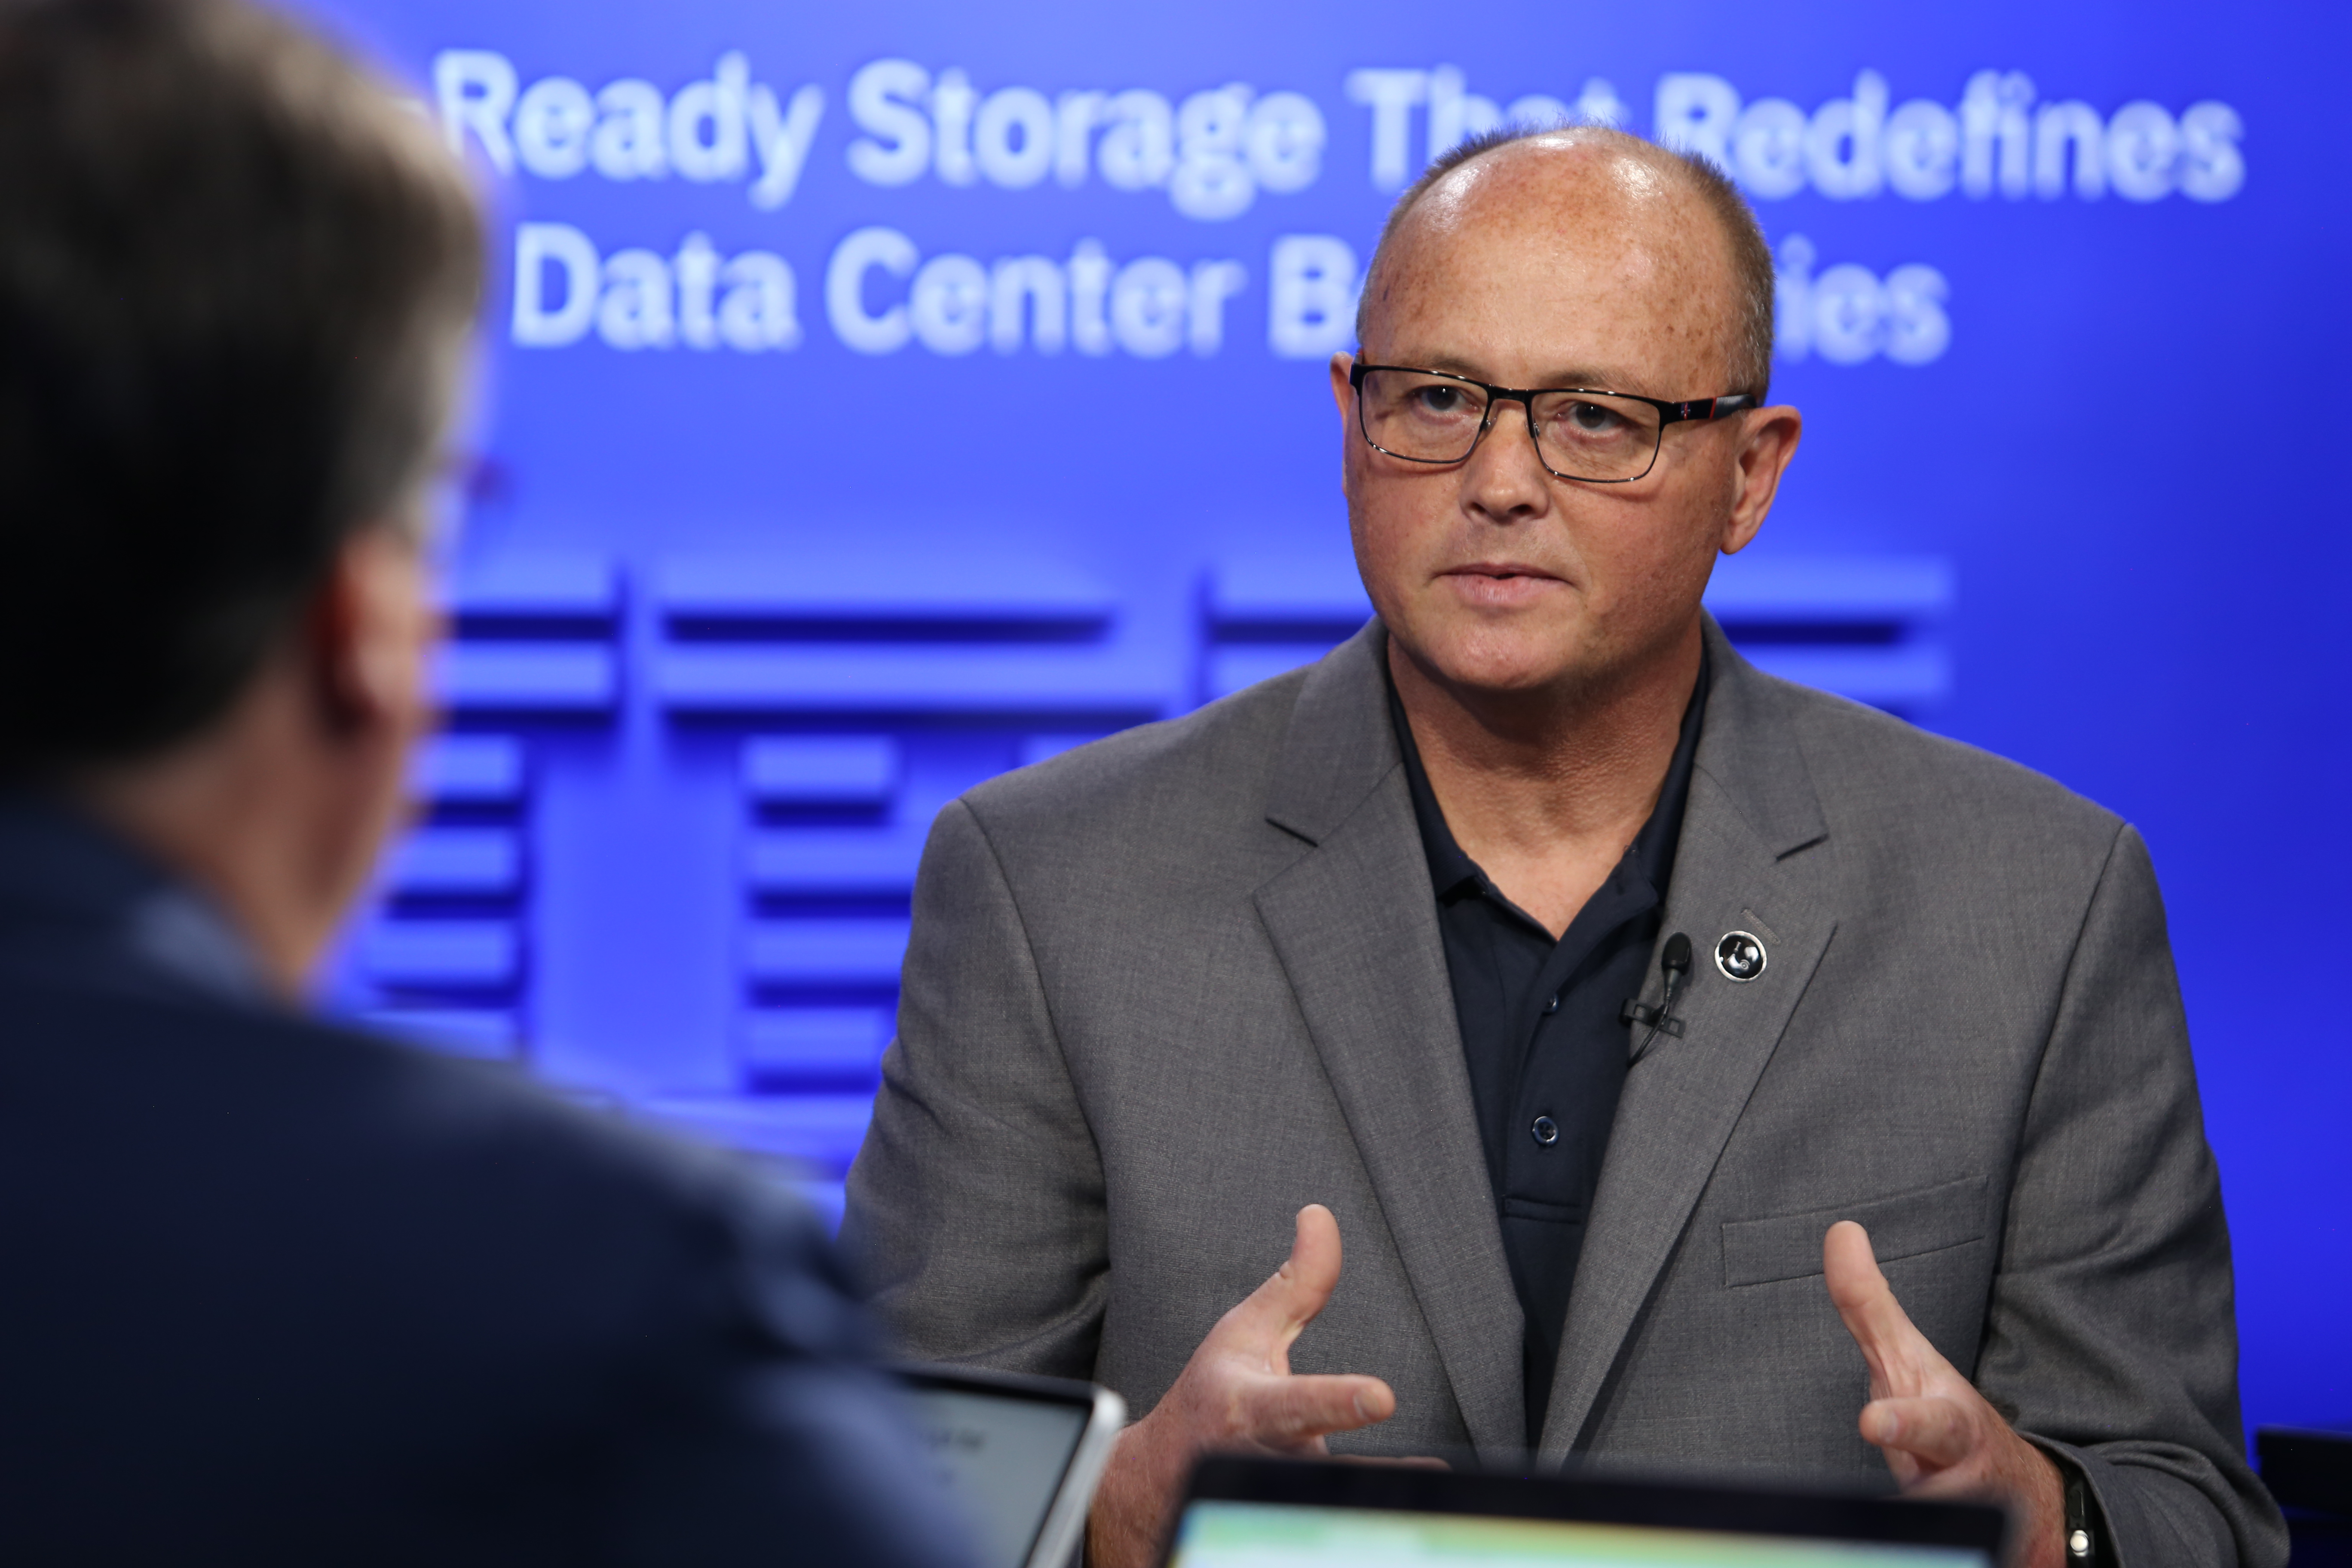 IBM's Scott Baker talks to theCUBE about the company's focus on storage infrastructure is guided by a need to bring AI to the data.